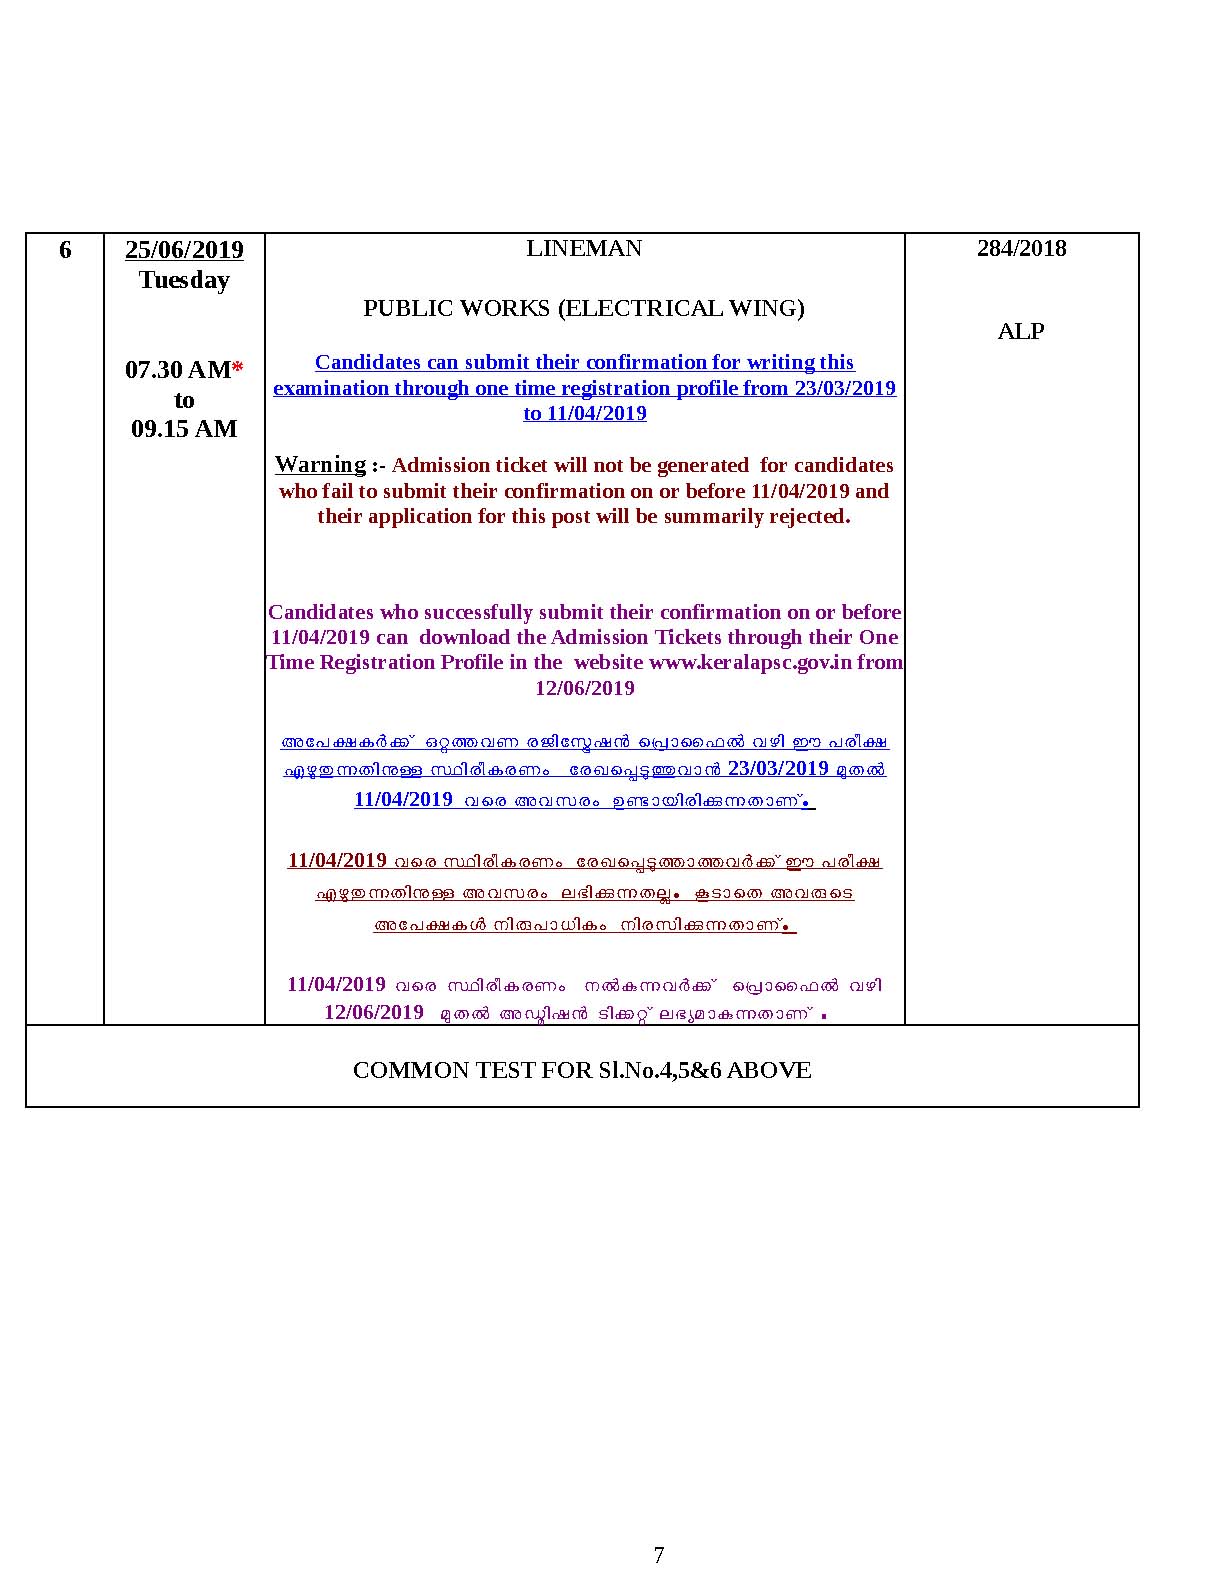 KPSC Examination Programme For The Month Of June 2019 - Notification Image 7